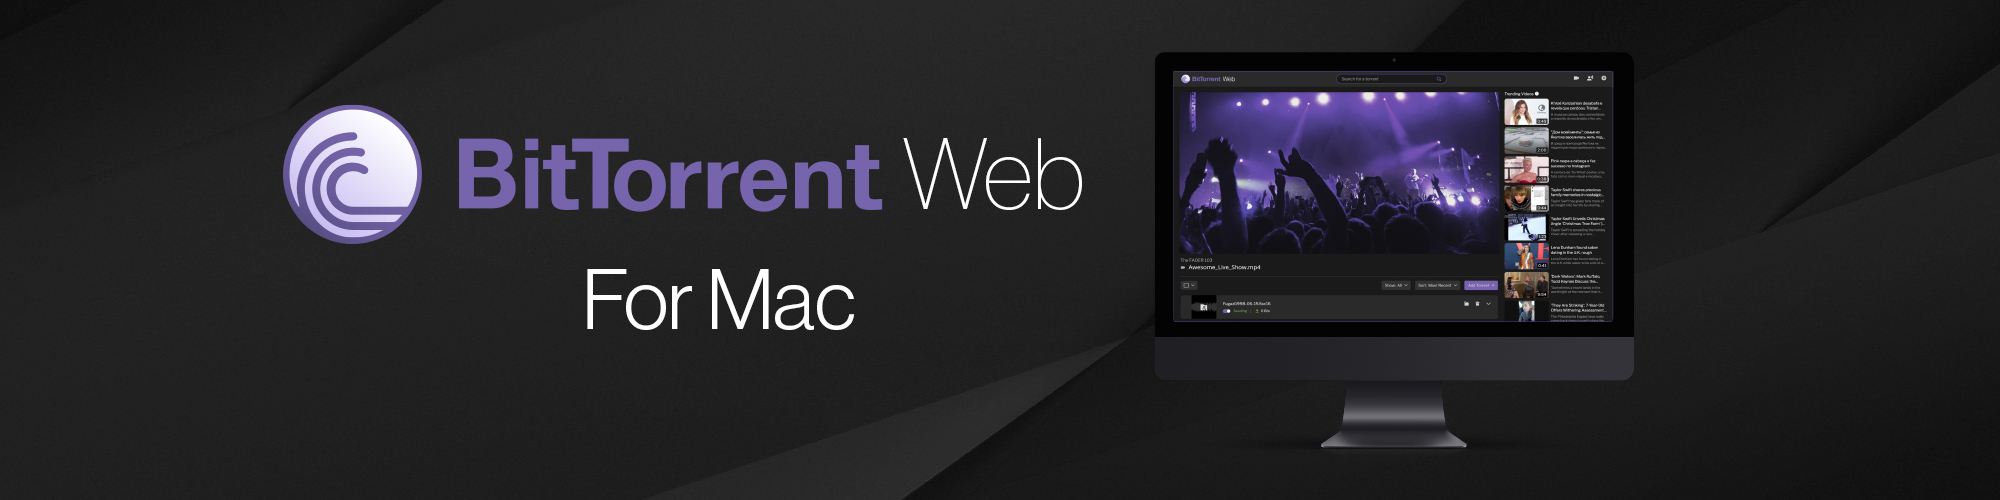 instal the new version for mac BitTorrent Pro 7.11.0.46903